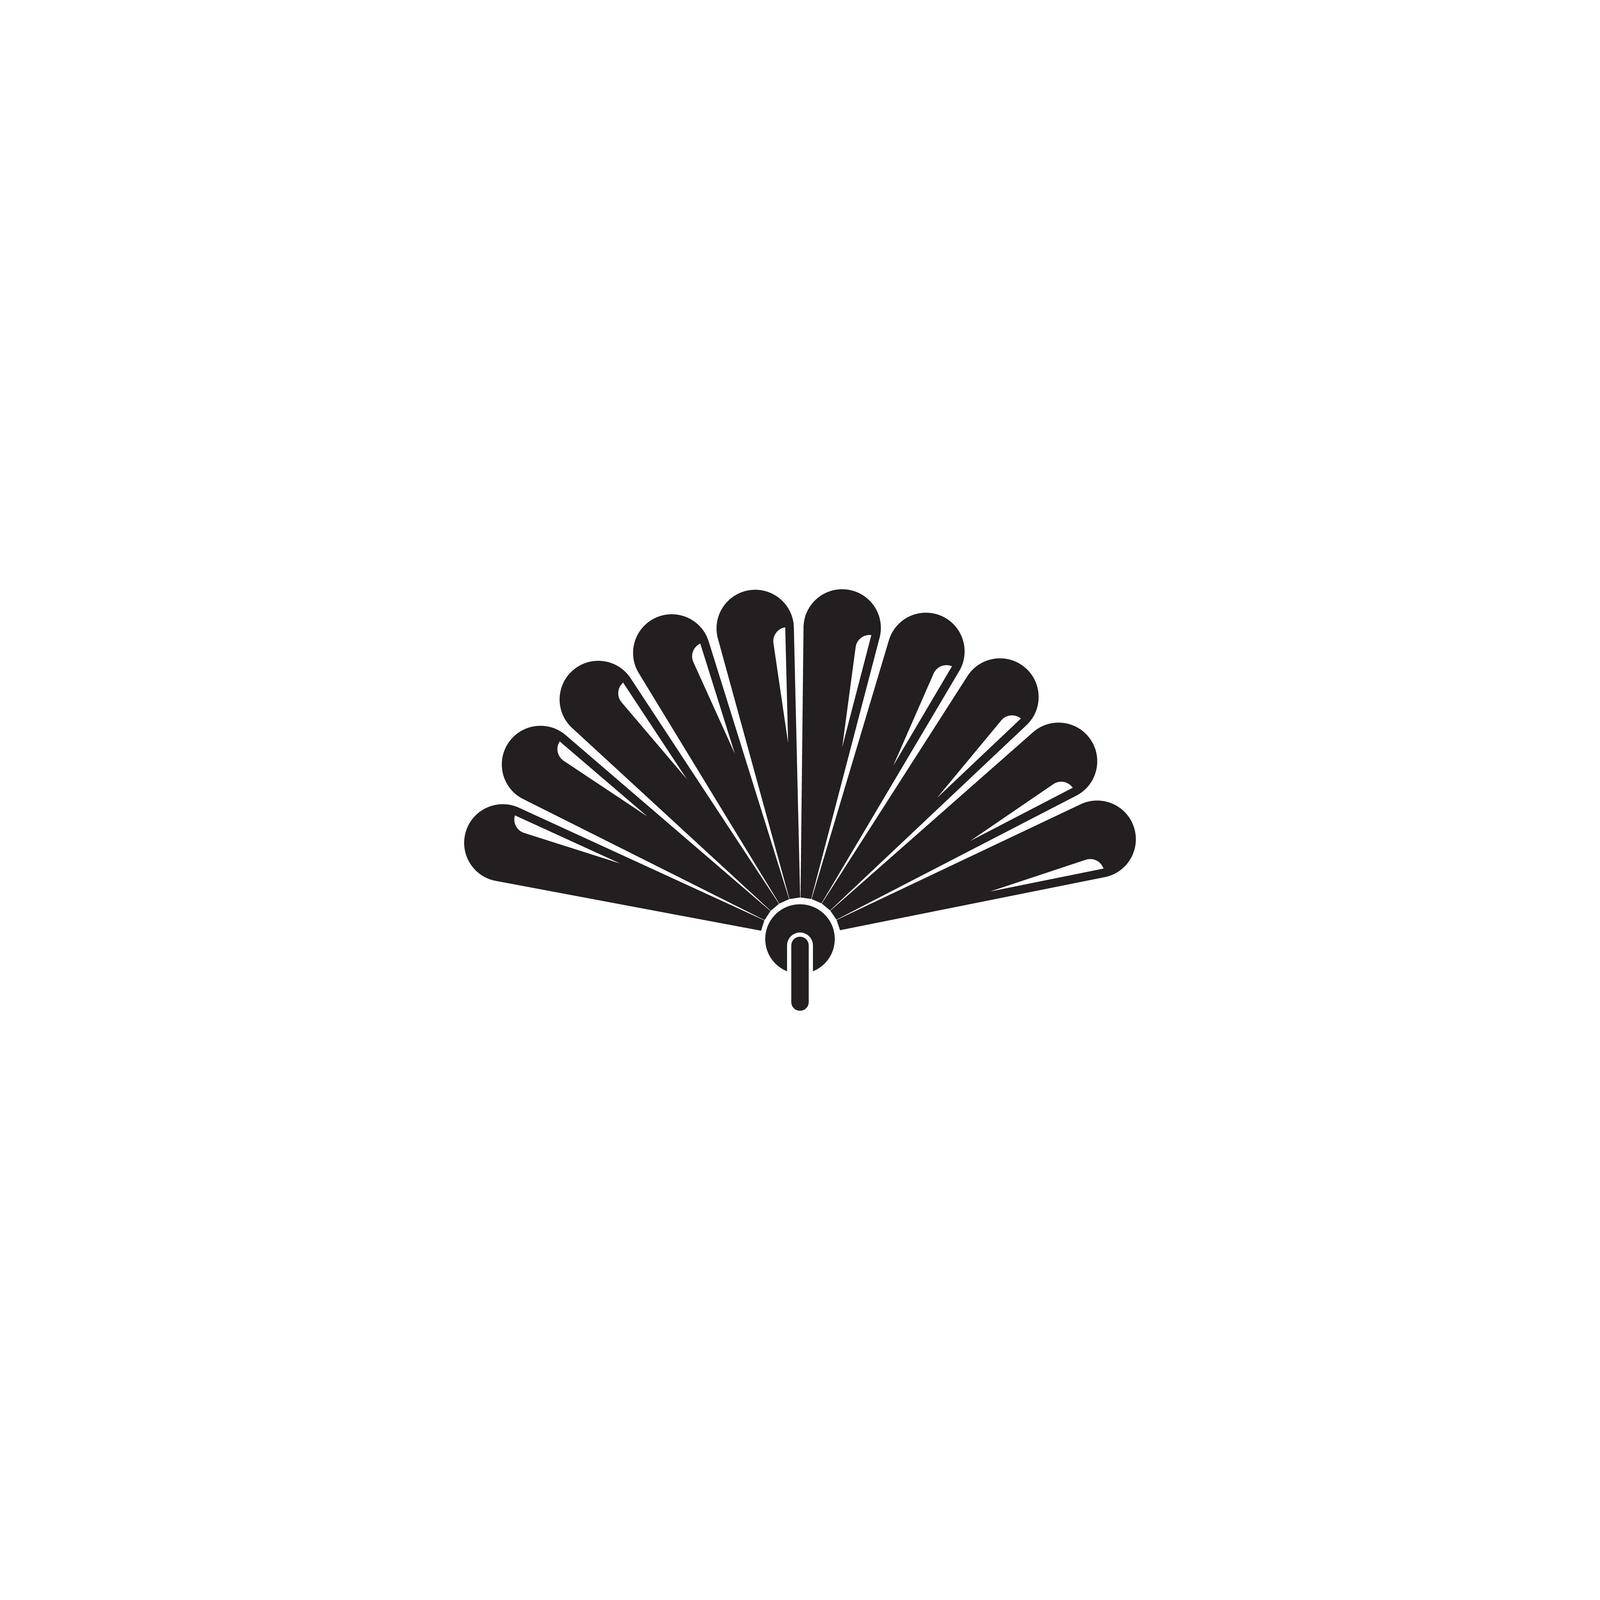 hand fan or traditional fan icon by rnking